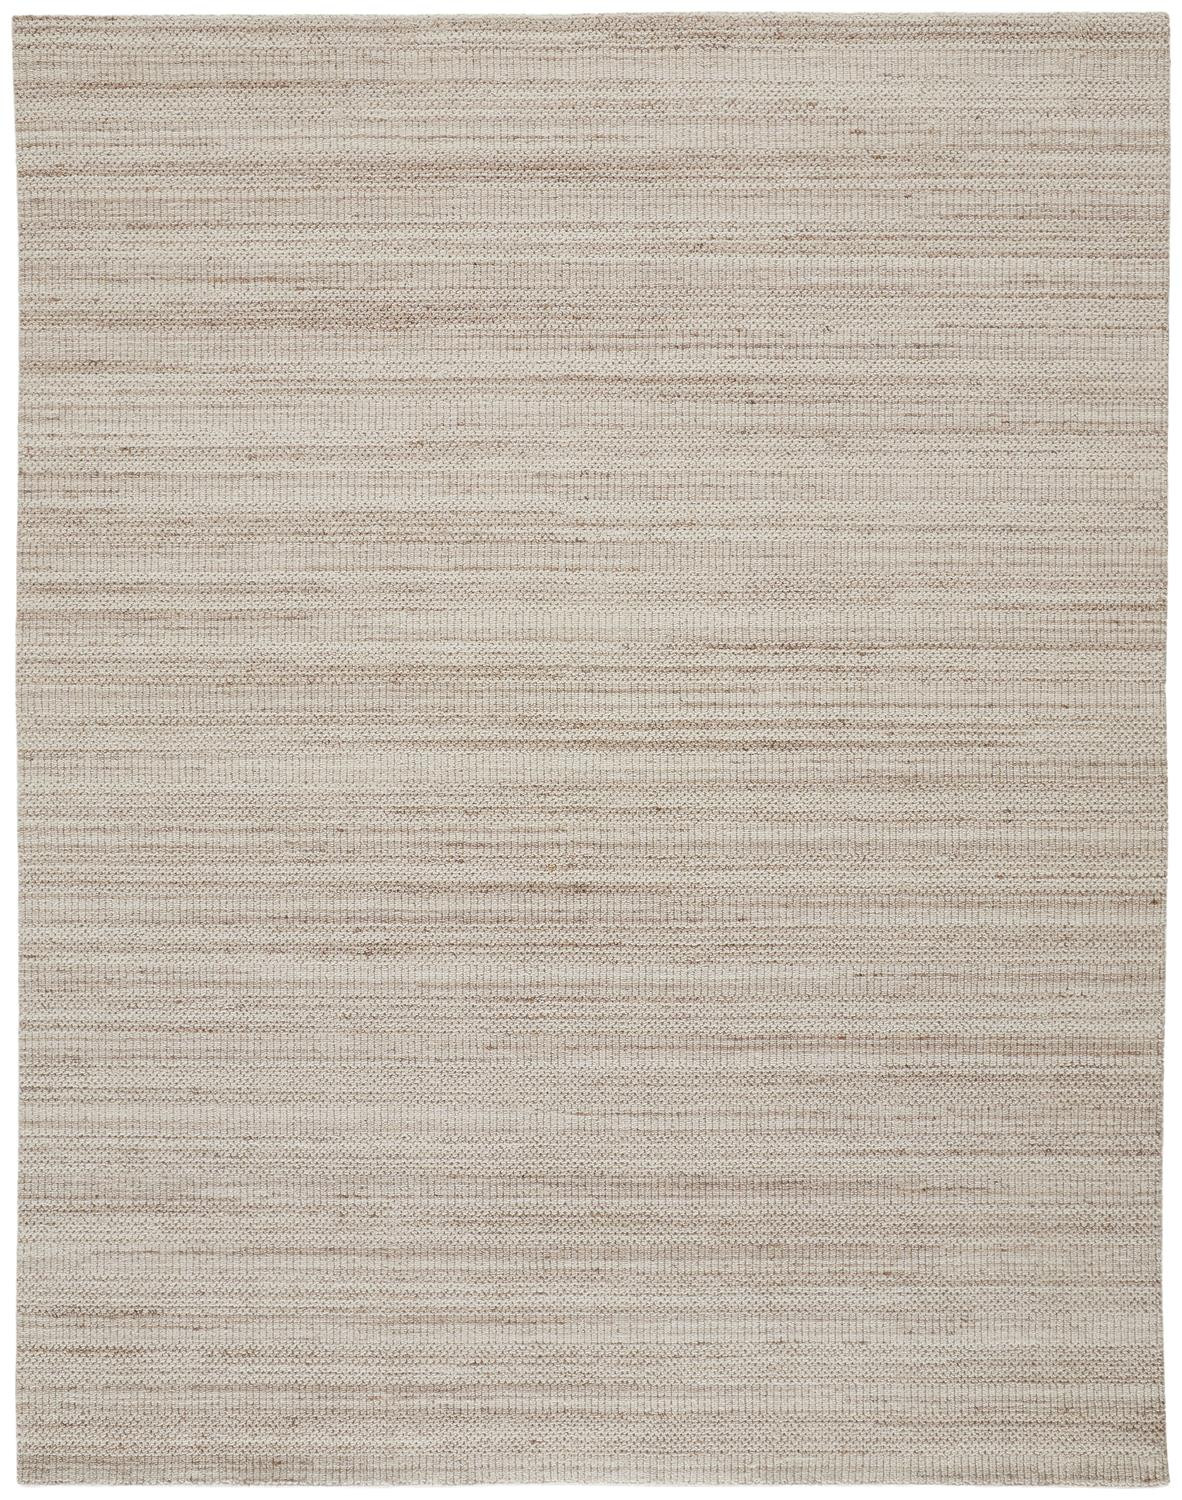 5' X 8' Ivory Wool Hand Woven Stain Resistant Area Rug-514039-1